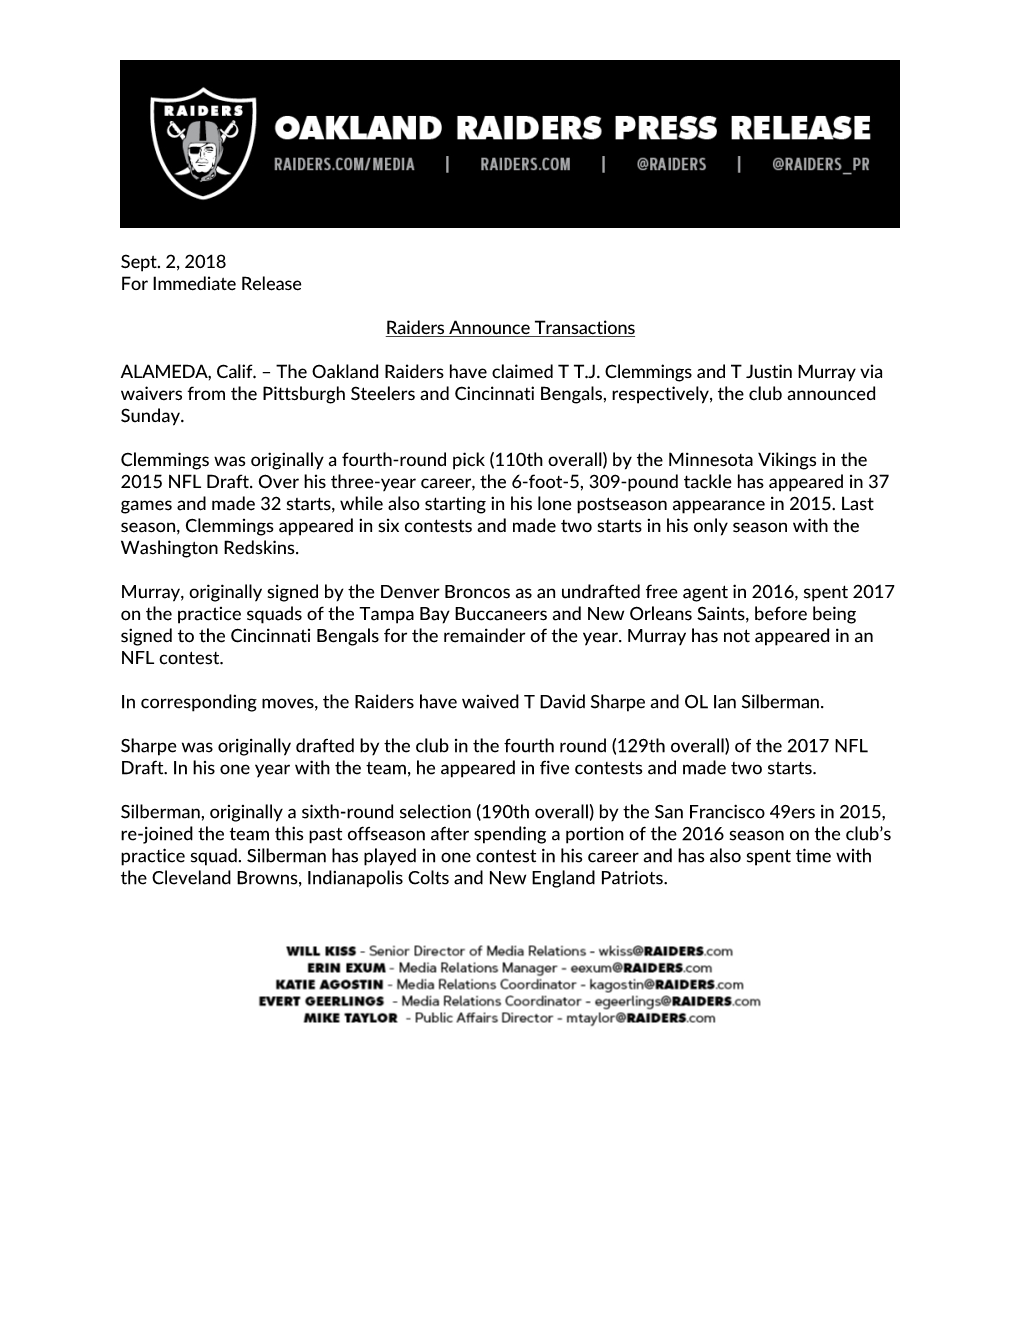 Sept. 2, 2018 for Immediate Release Raiders Announce